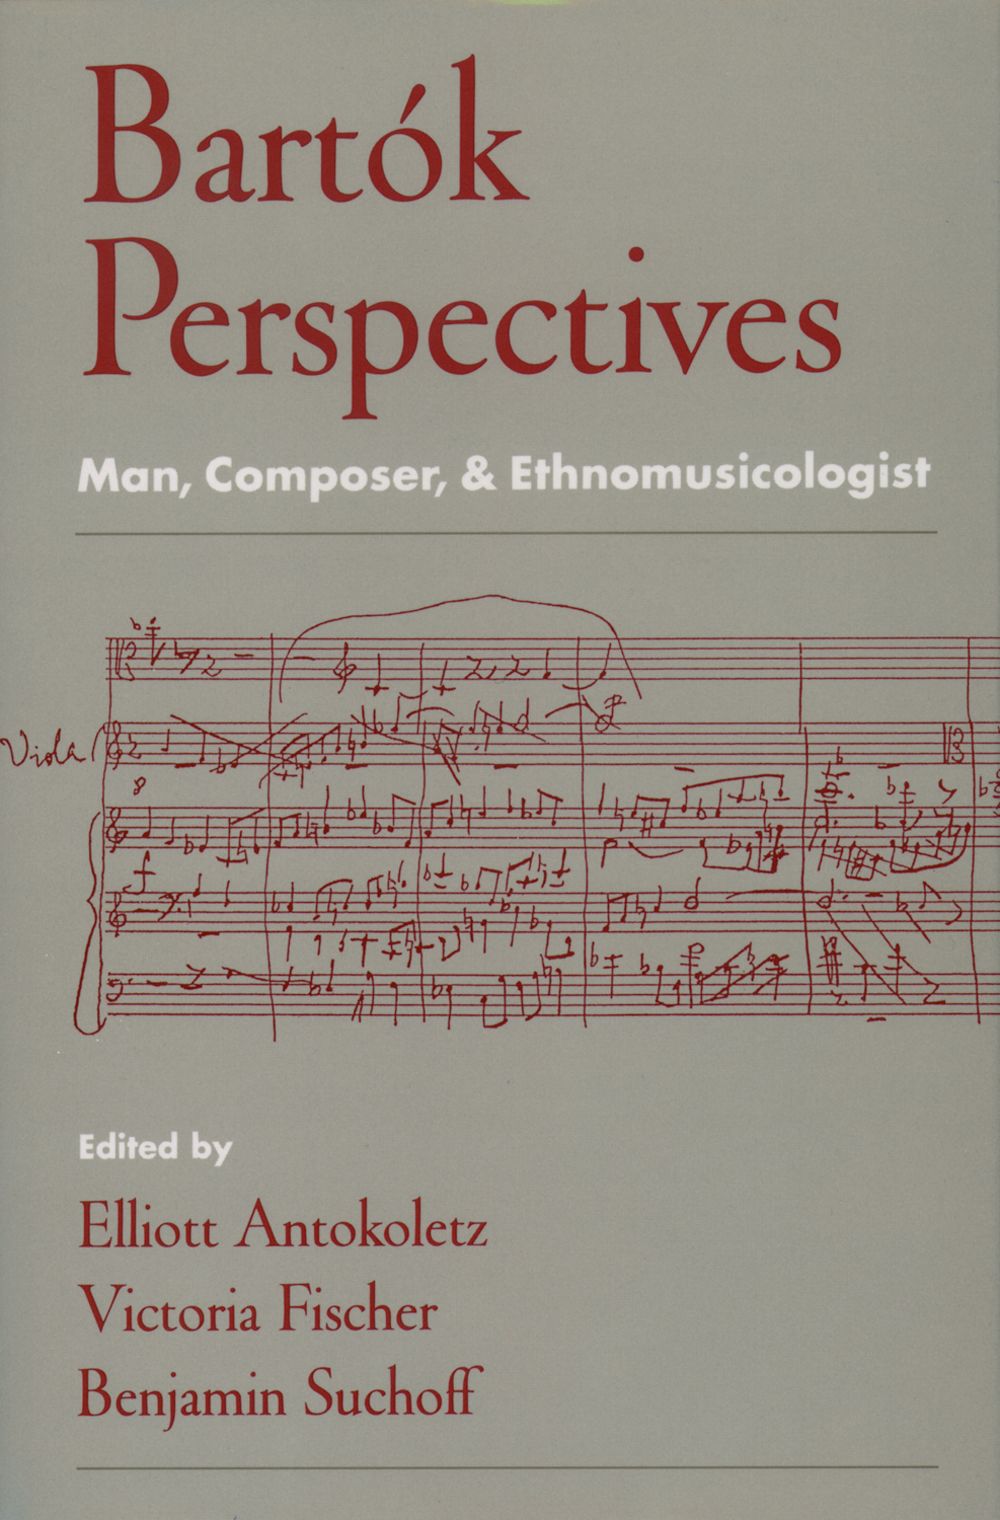 Bartok Perspectives Hard Cover Sheet Music Songbook